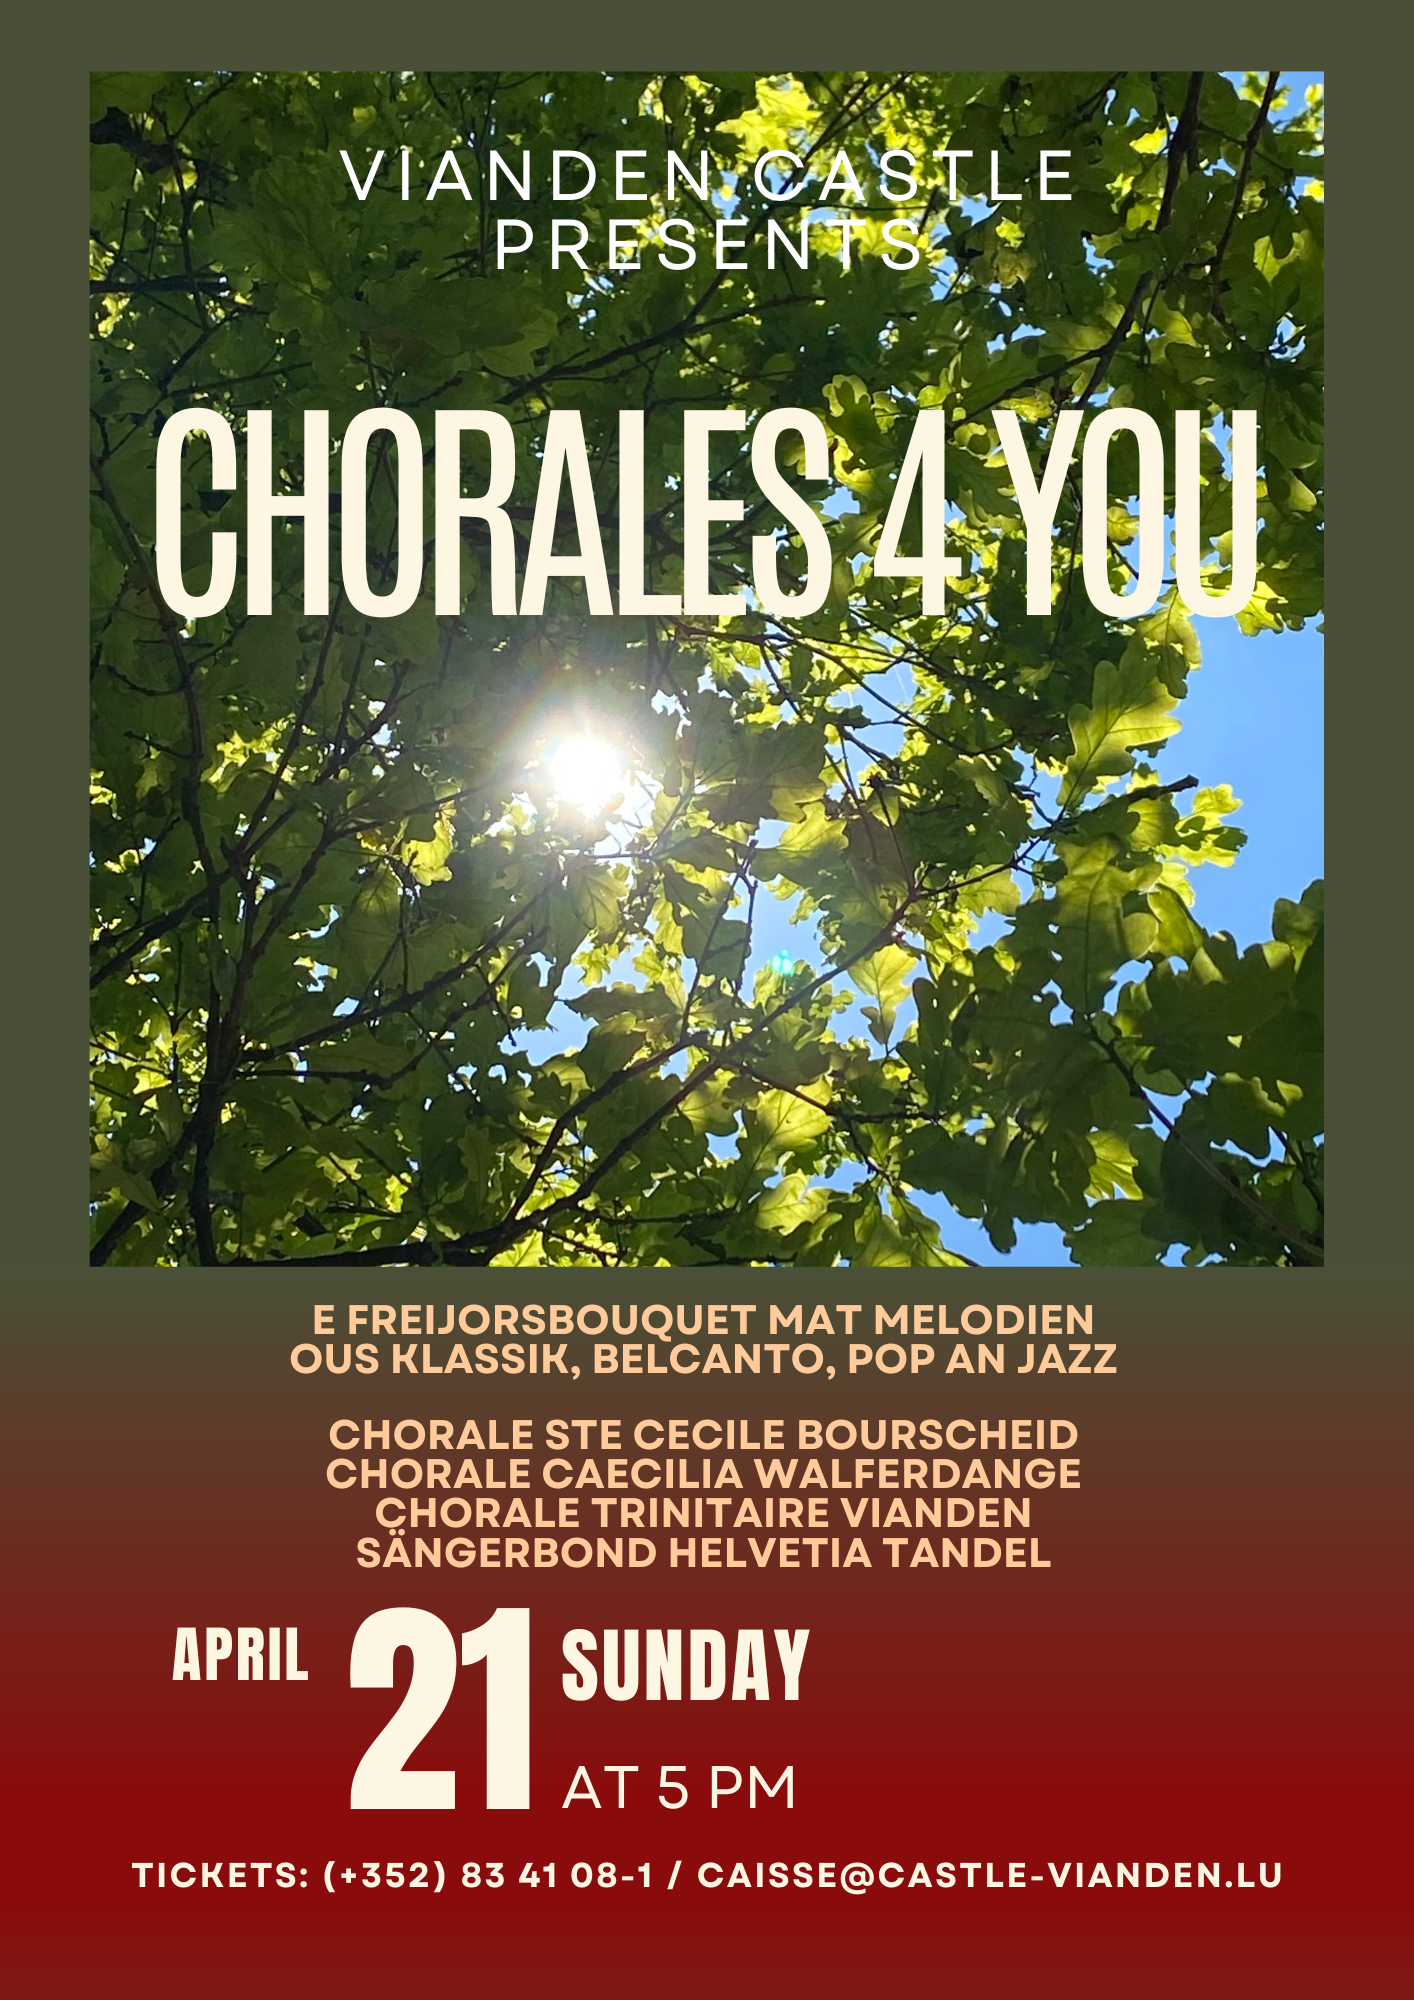 Chorales 4 you